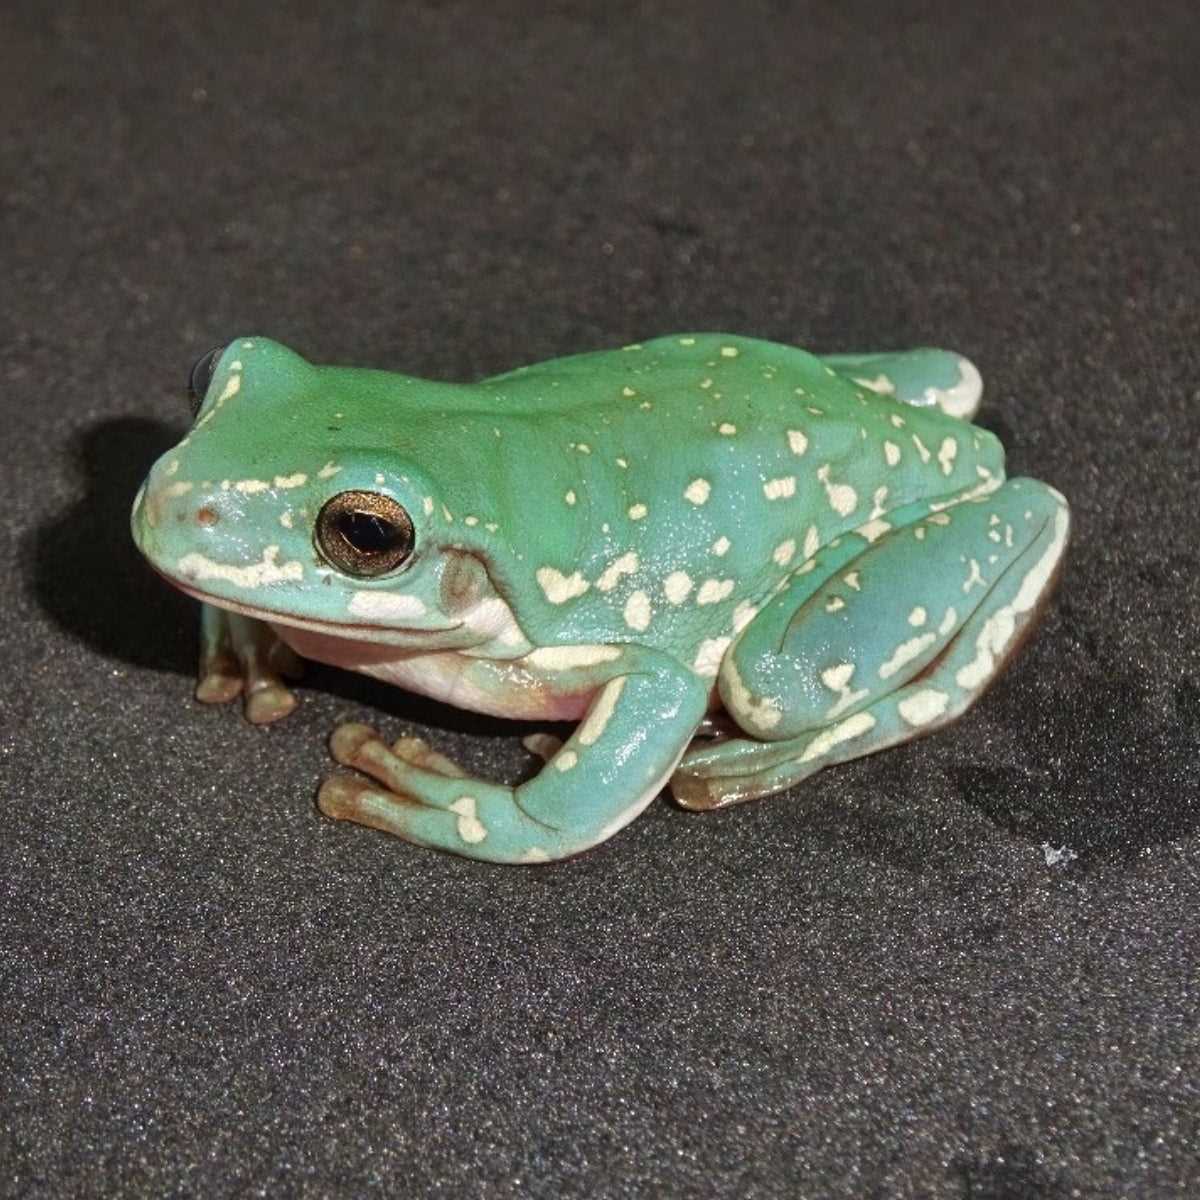 The Popular White Tree Frog Morphs in the Pet Trade